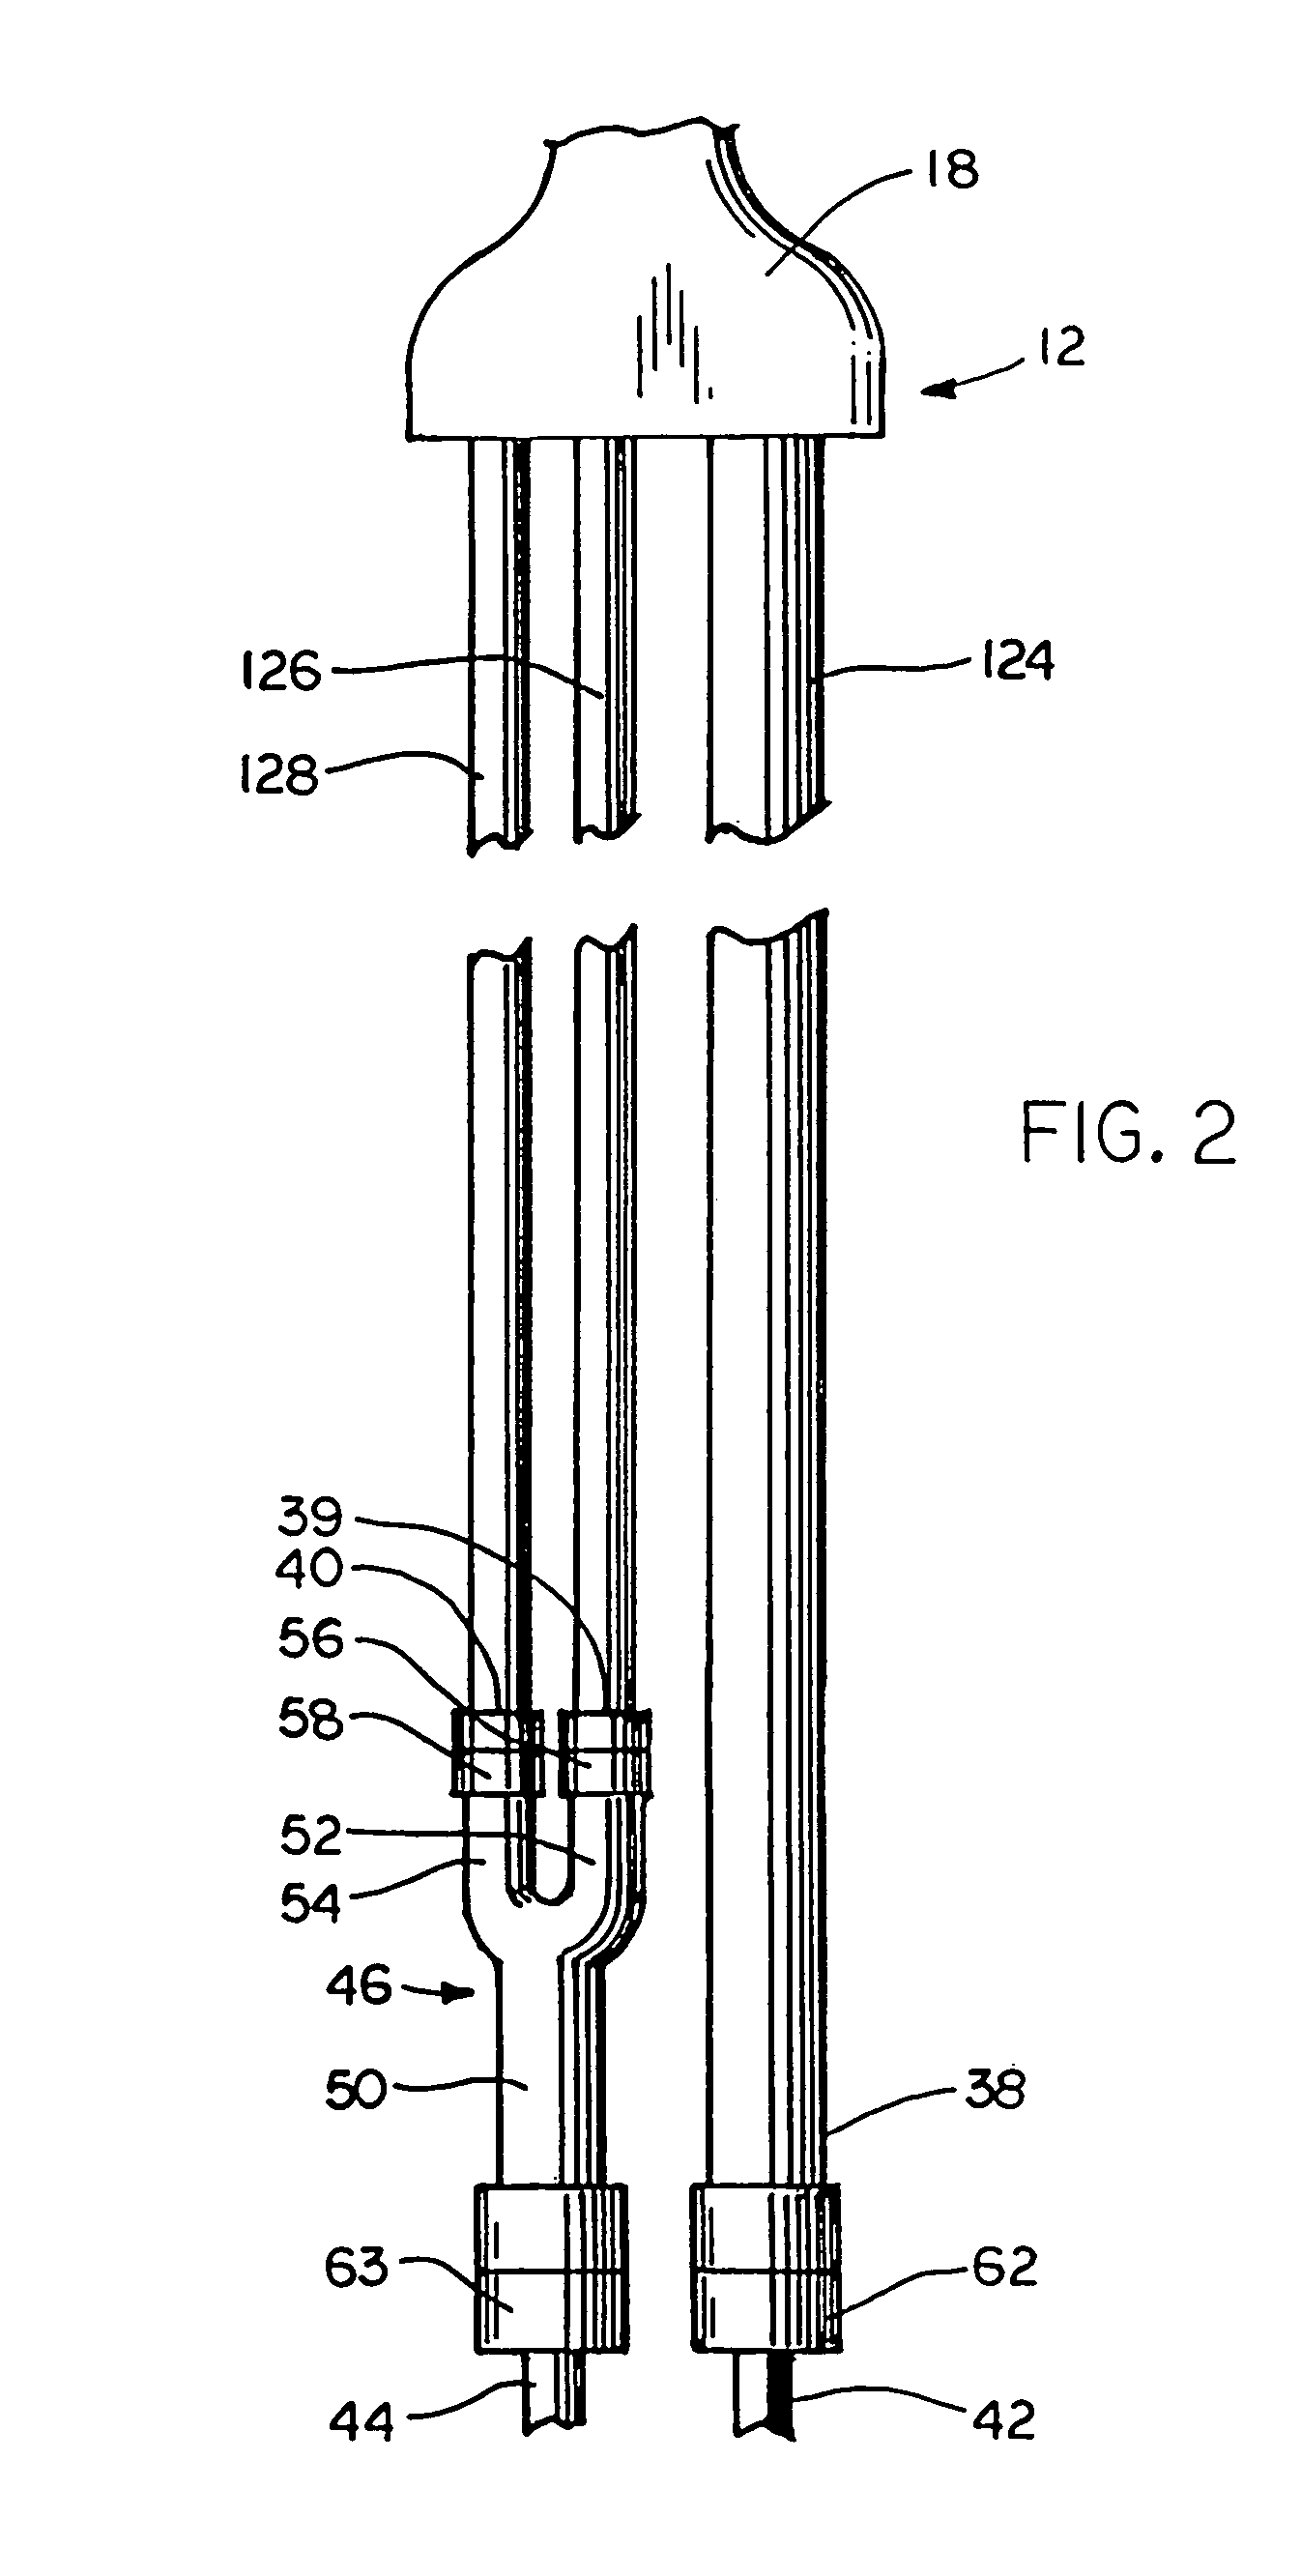 Multi-lumen catheter system used in a blood treatment process